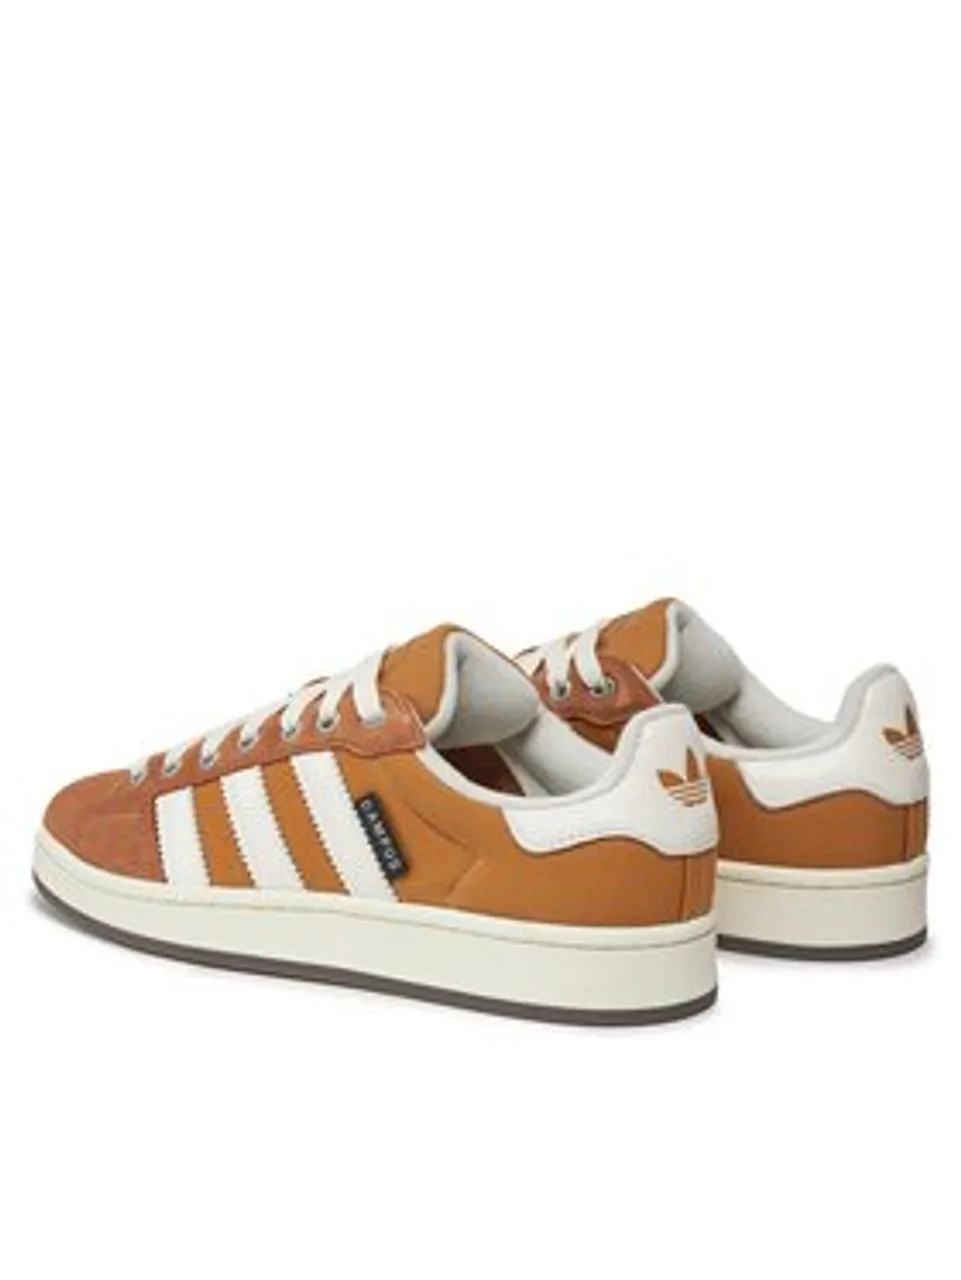 adidas Sneakers Campus 00s IF8774 Braun